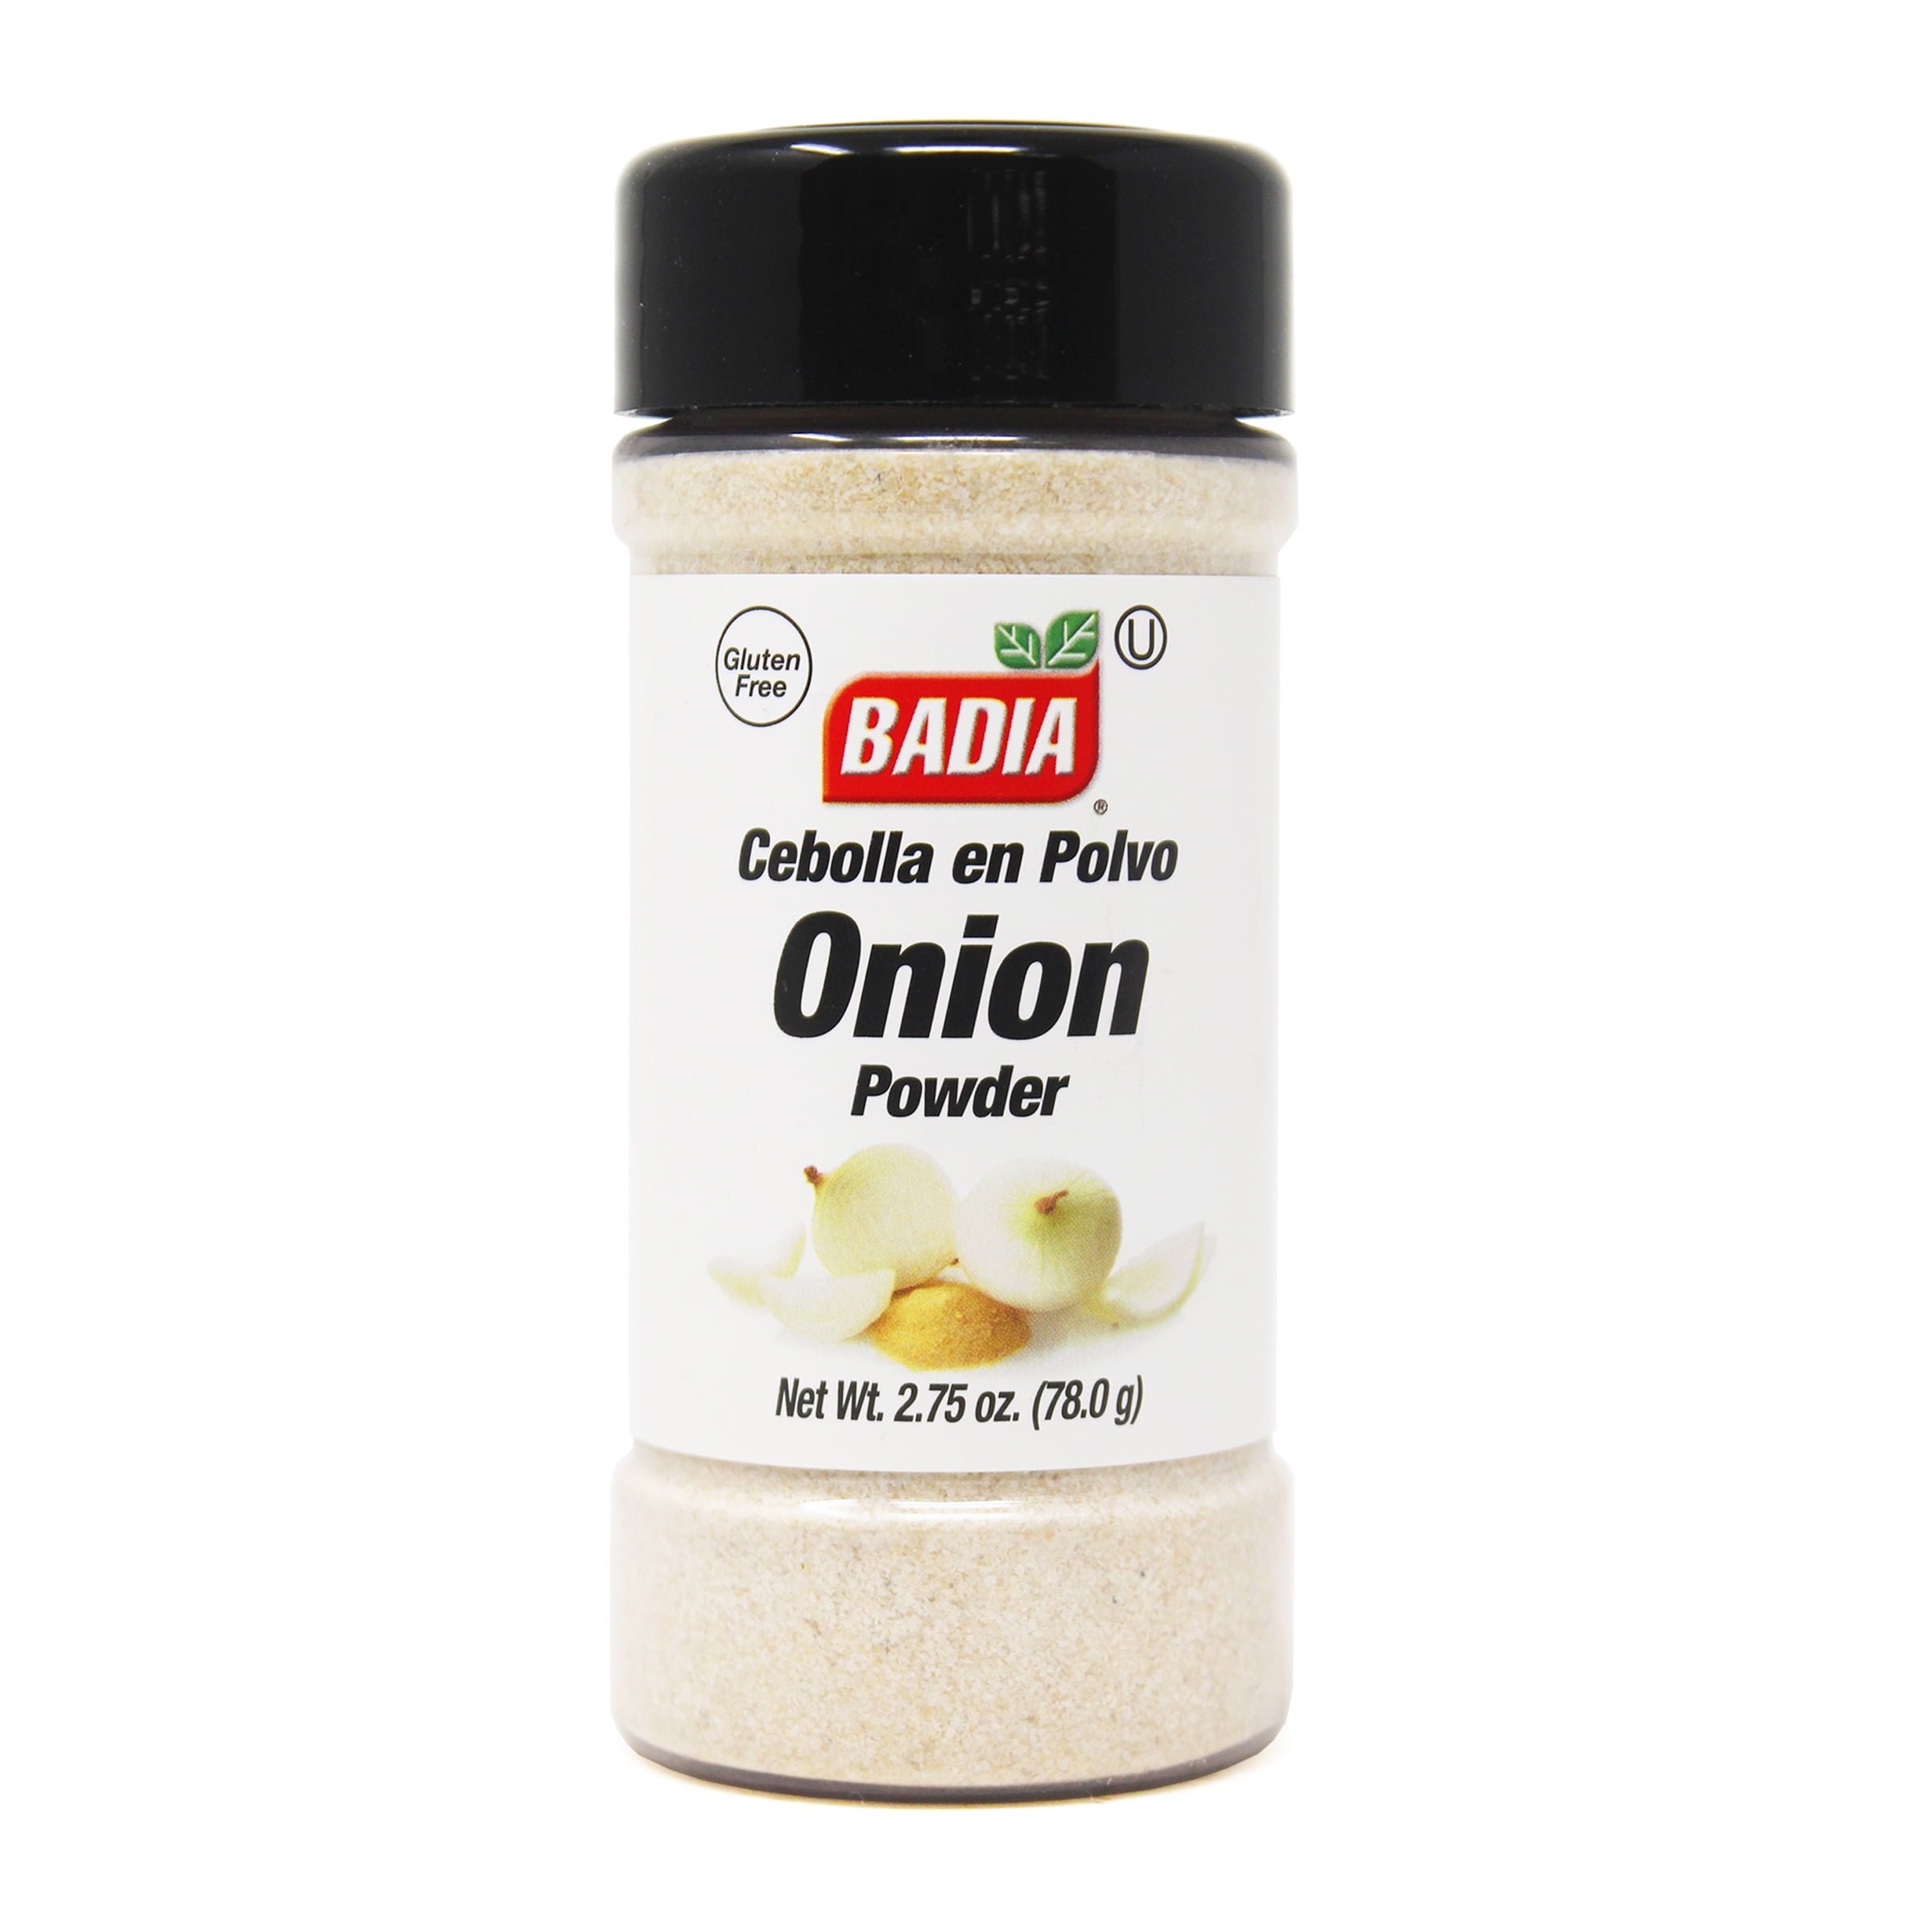 Great Value Minced Onion, 2.35 Oz 